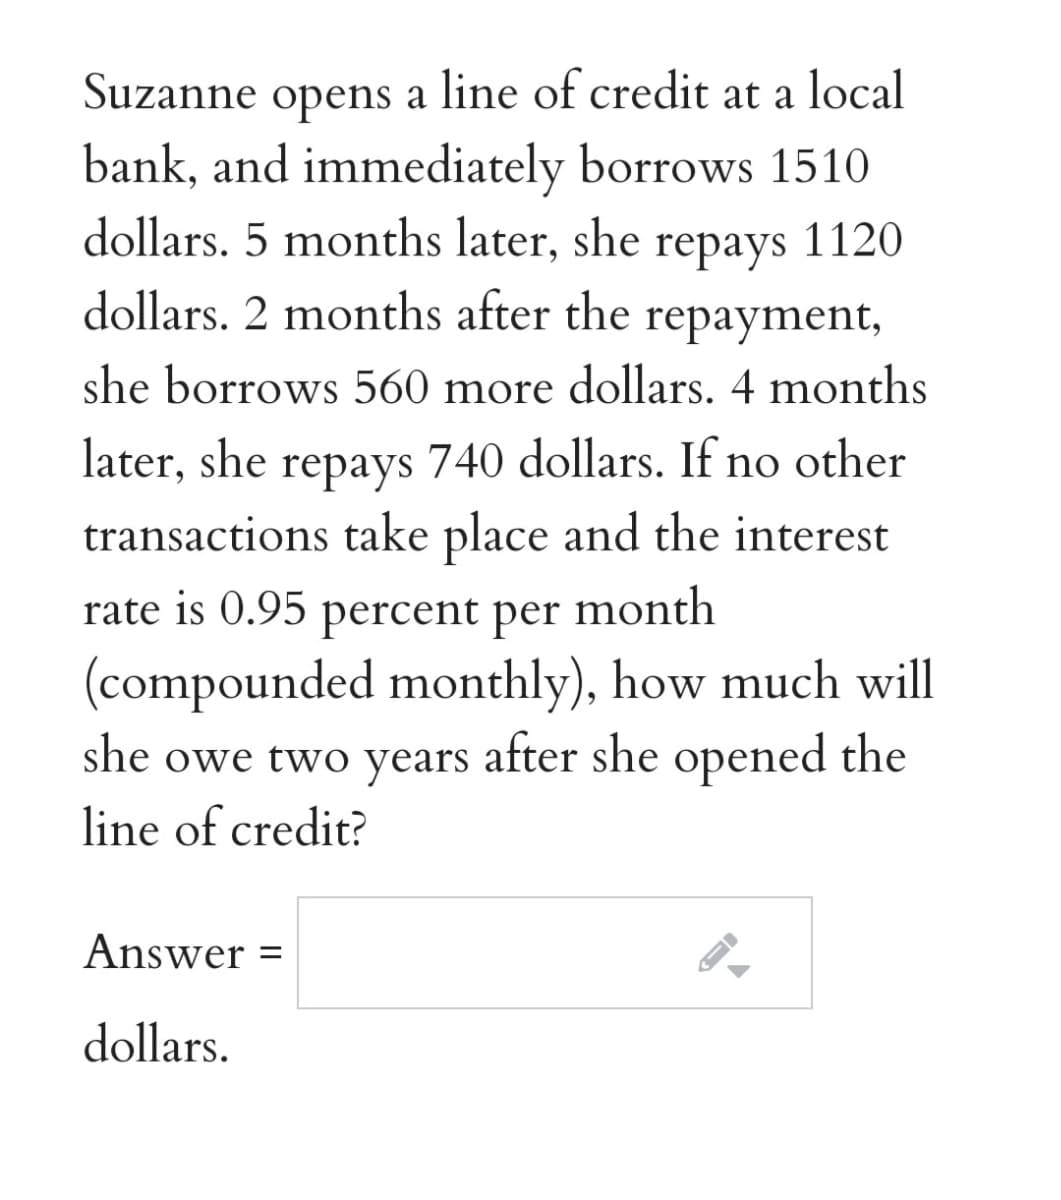 Suzanne opens a line of credit at a local
bank, and immediately borrows 1510
dollars. 5 months later, she
dollars. 2 months after the repayment,
repays 1120
she borrows 560 more dollars. 4 months
later, she repays 740 dollars. If no other
transactions take place and the interest
rate is 0.95 percent per
month
(compounded monthly), how much will
she owe two years after she opened the
line of credit?
Answer =
dollars.
